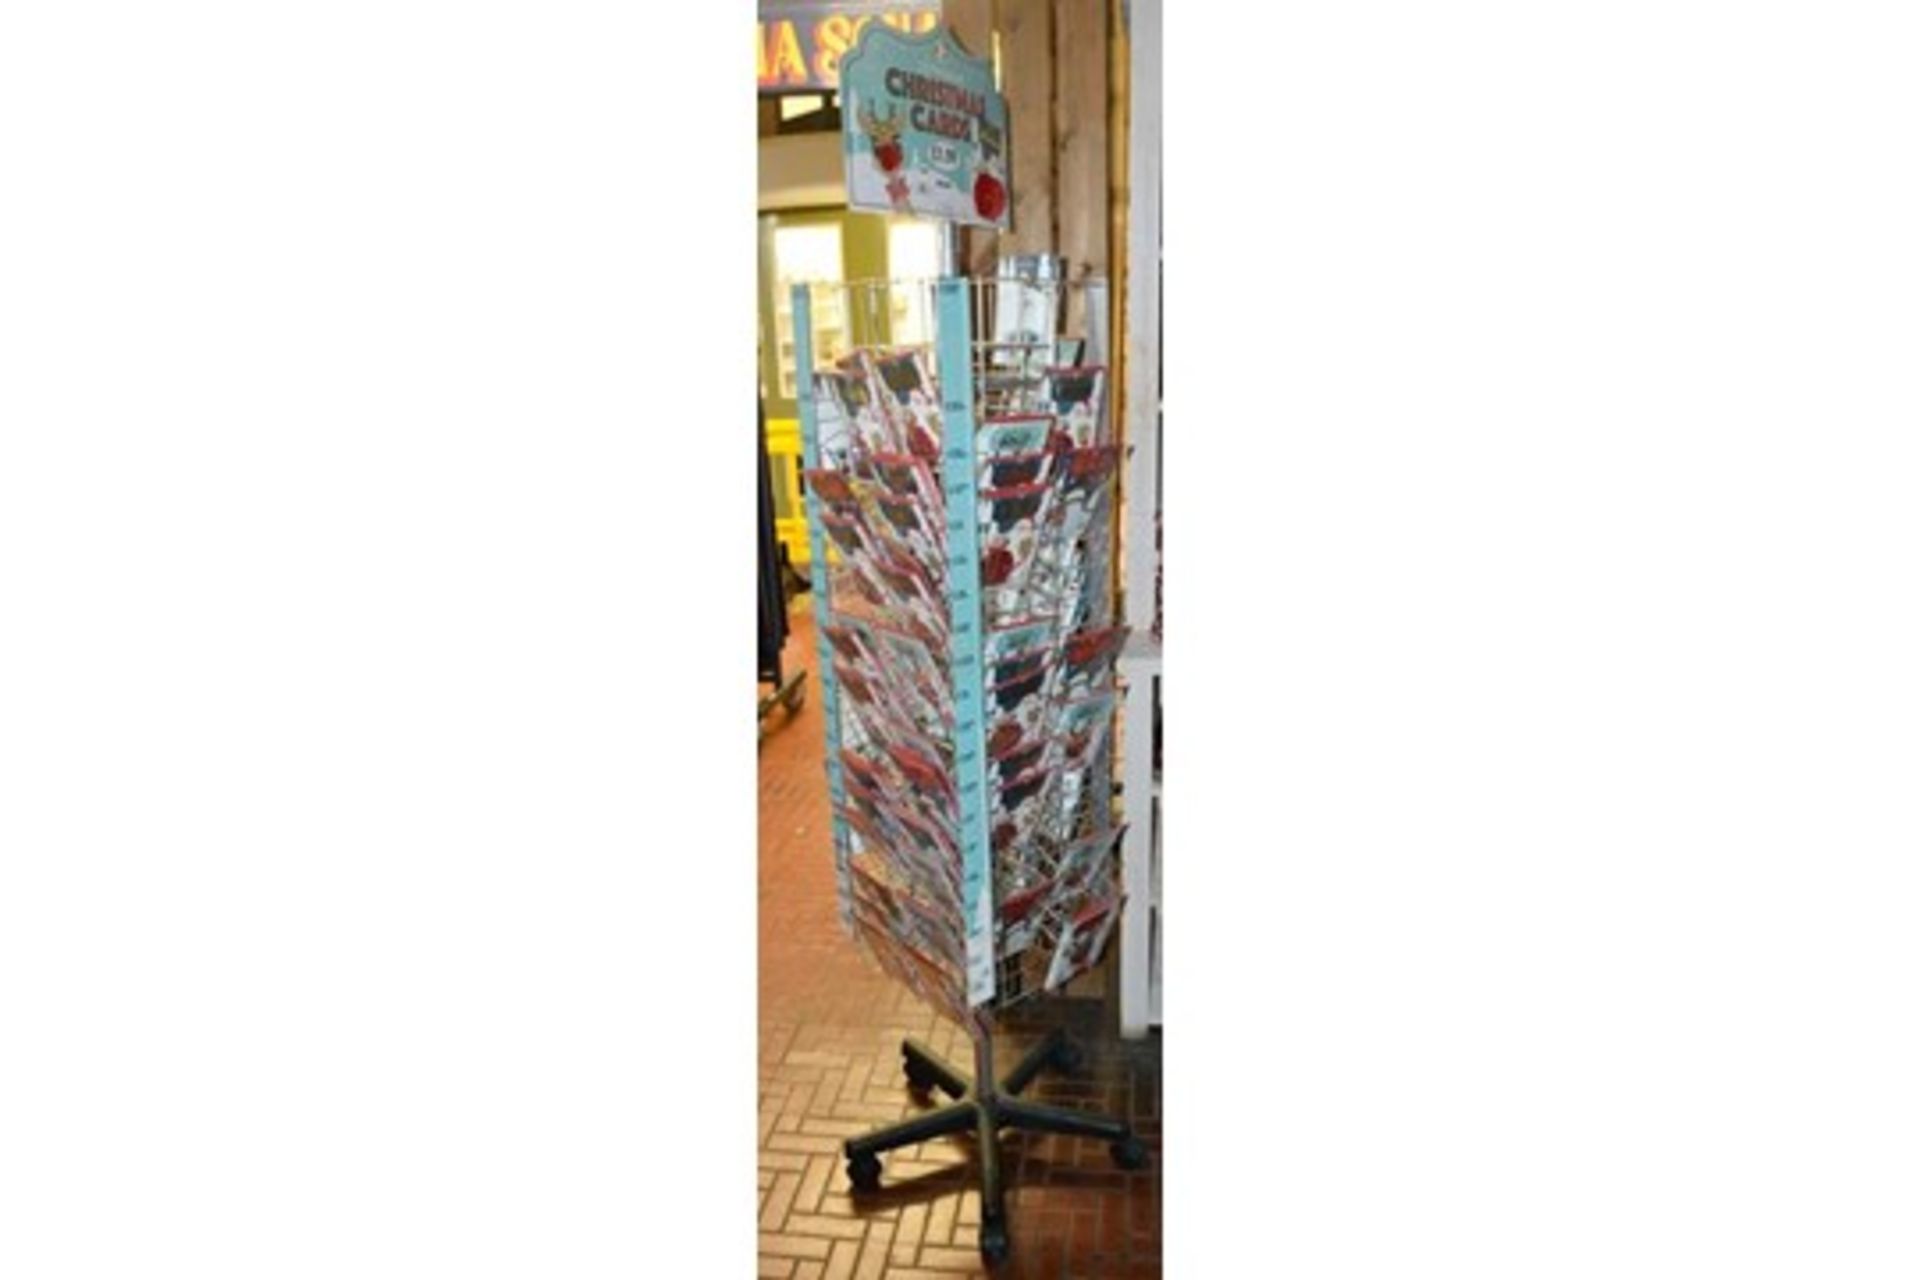 27 x Retail Carousel Display Stands With Approximately 2,800 Items of Resale Stock - Includes - Image 53 of 61